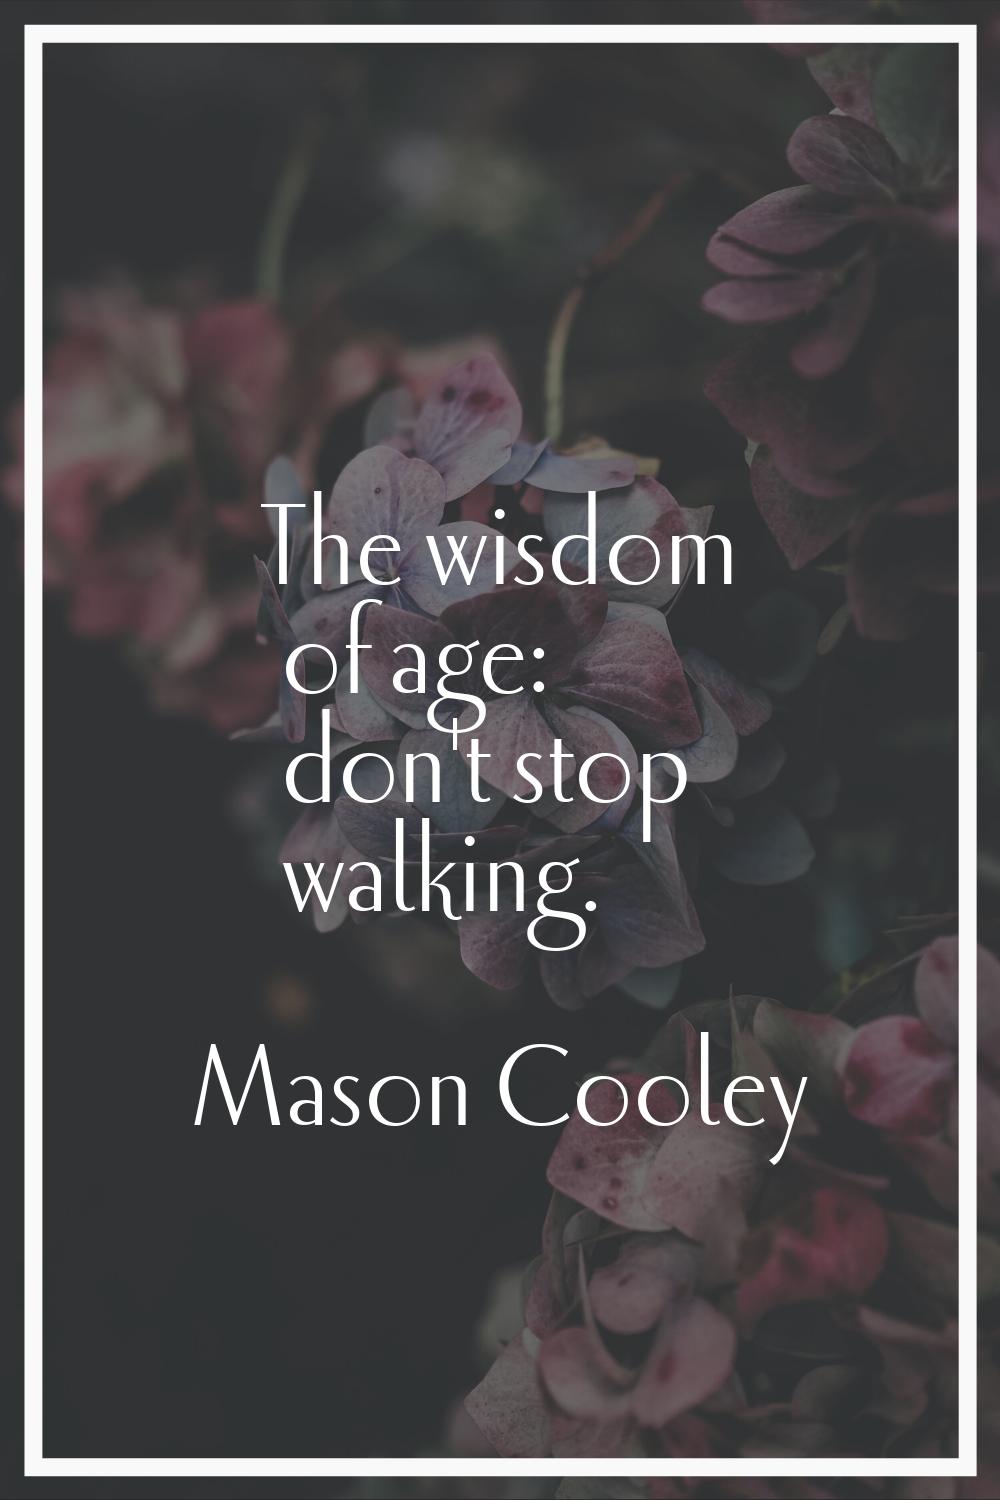 The wisdom of age: don't stop walking.